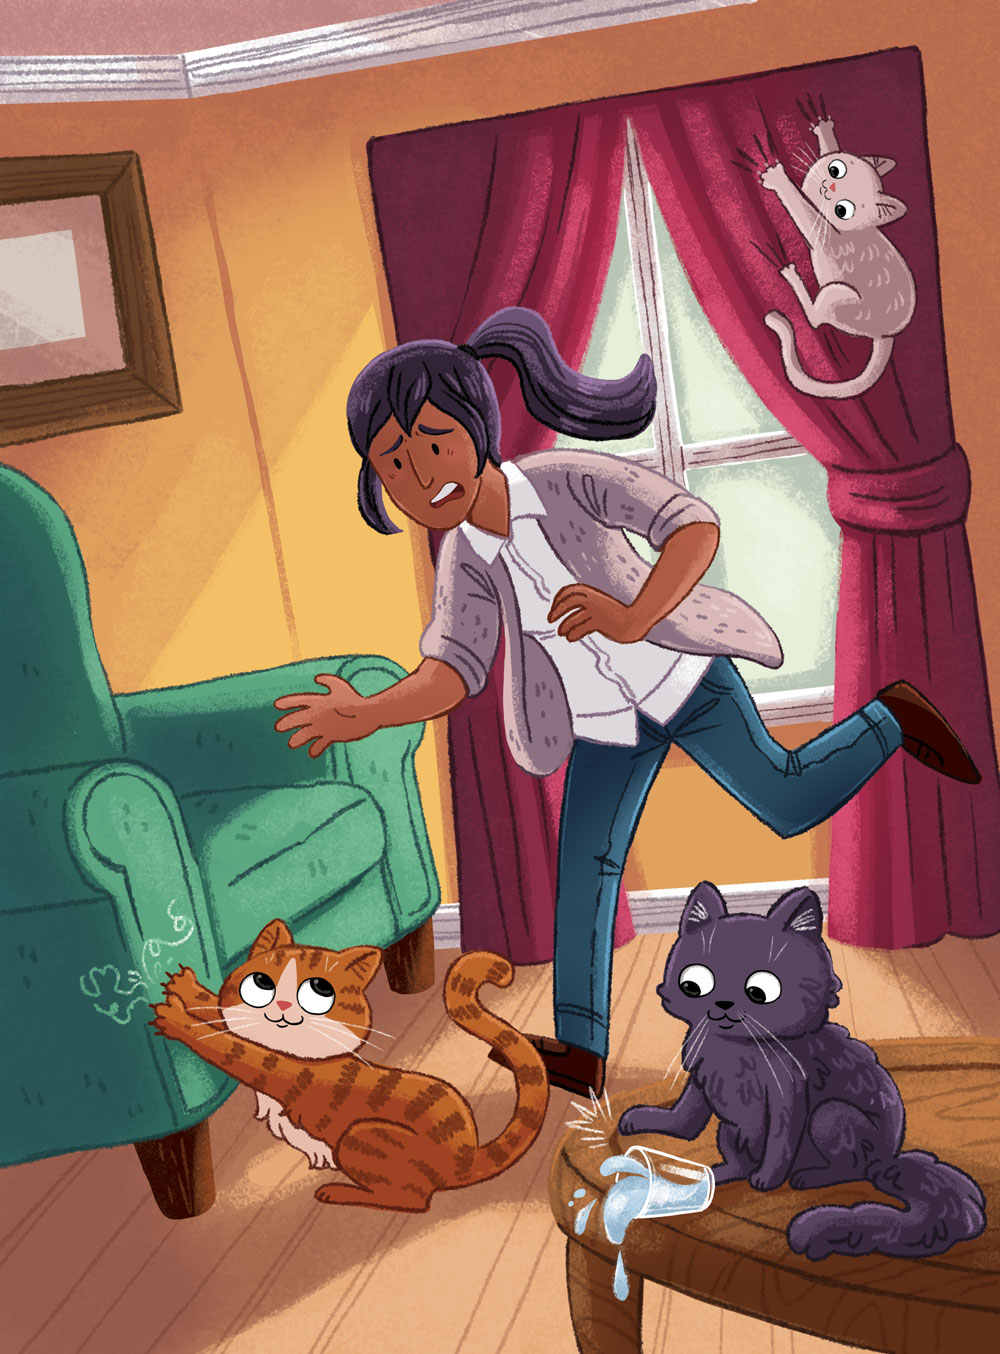 Illustration of woman and her three cats clawing furniture.